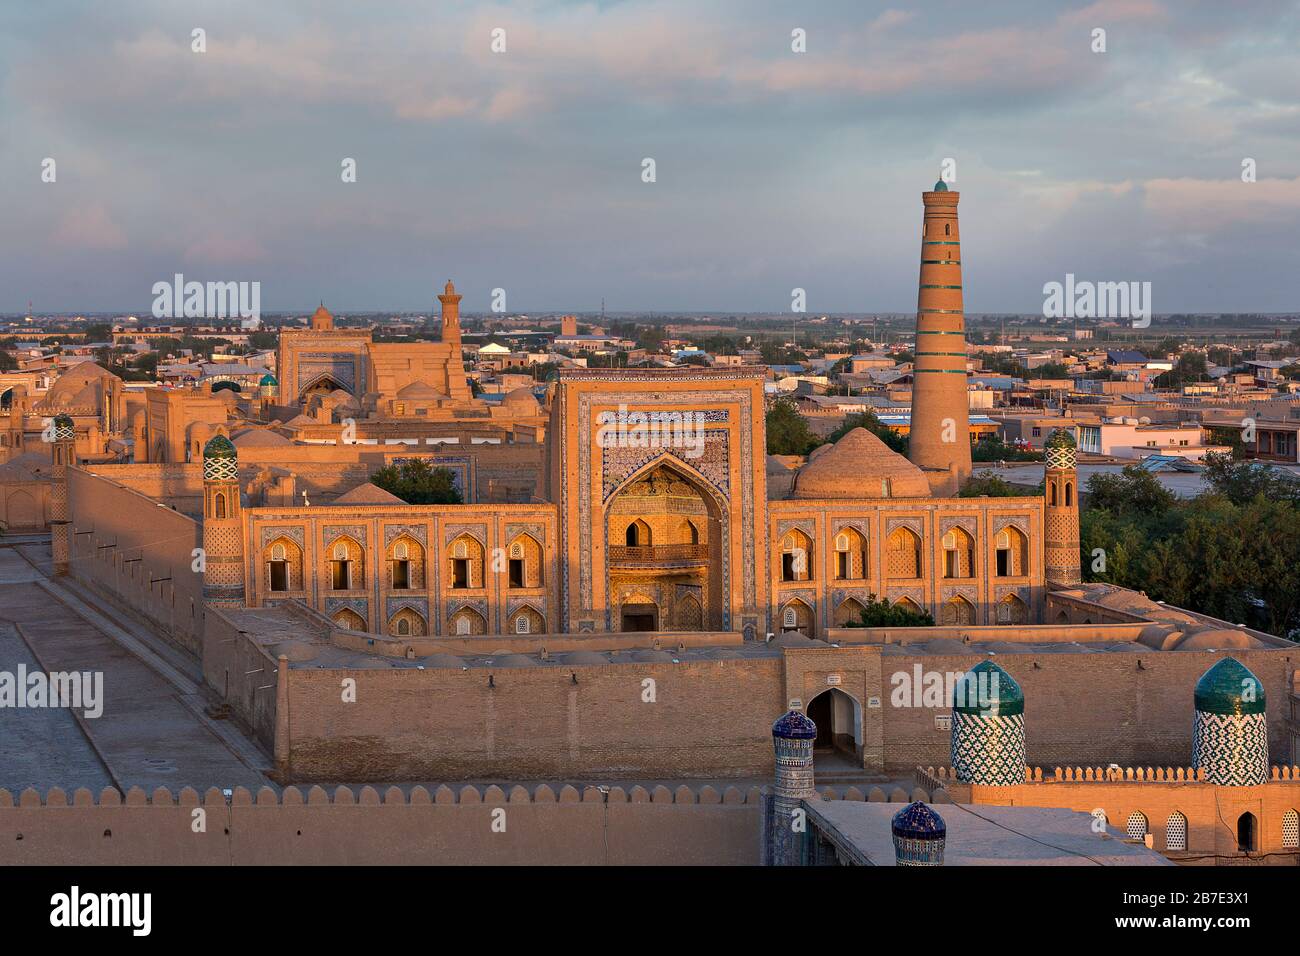 View over the skyline of the ancient city of Khiva at the sunset, Uzbekistan Stock Photo